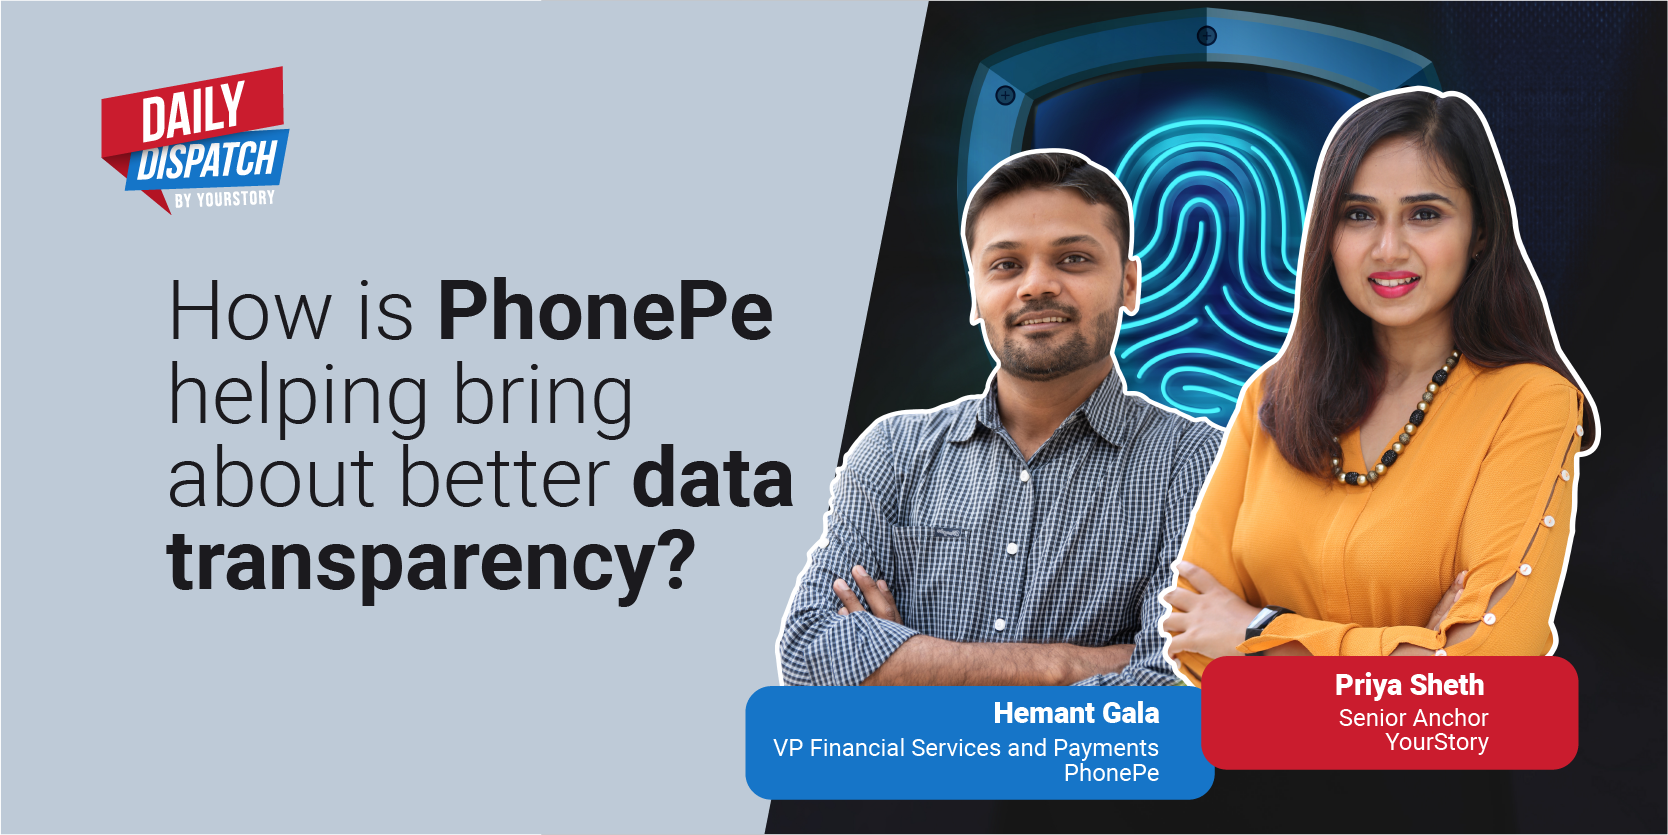 How fintech giant PhonePe plans to reach 500M customers